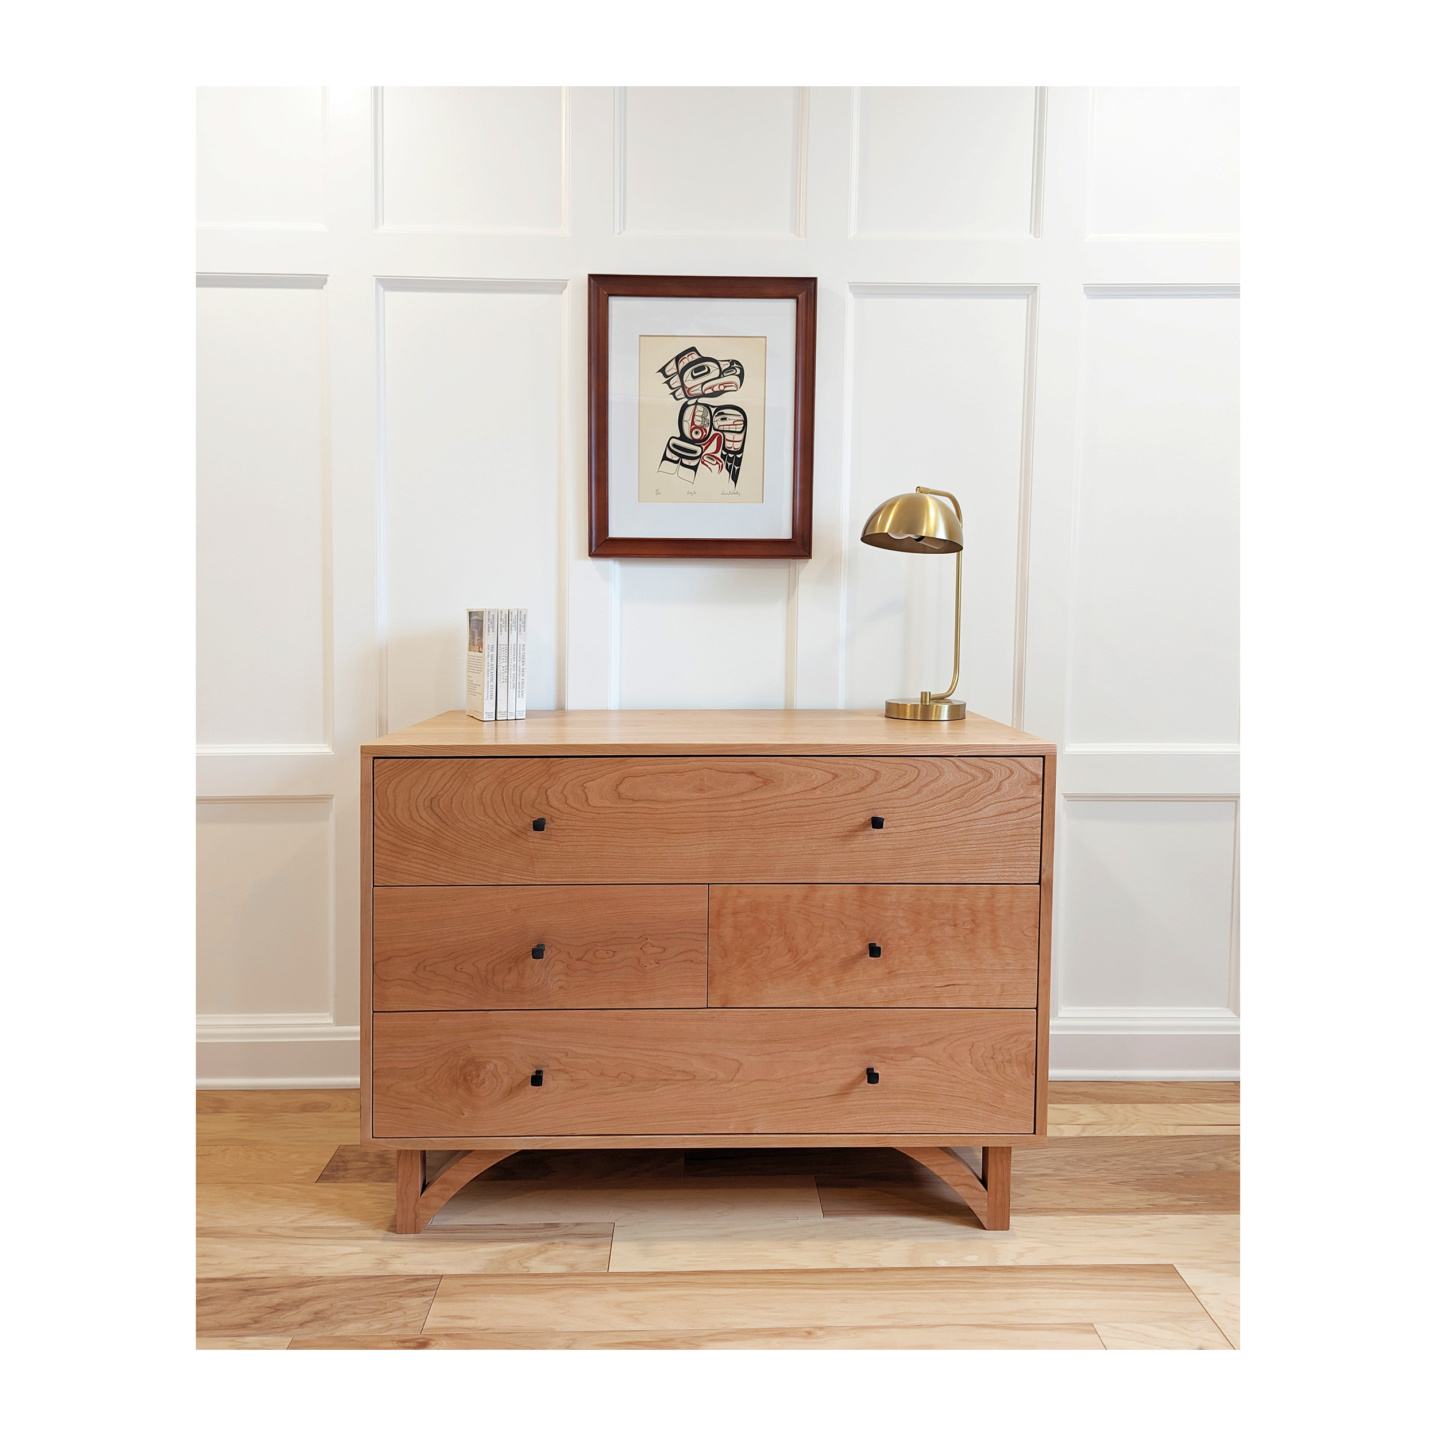 Solid wood dresser made with cherry sourced from Ohio